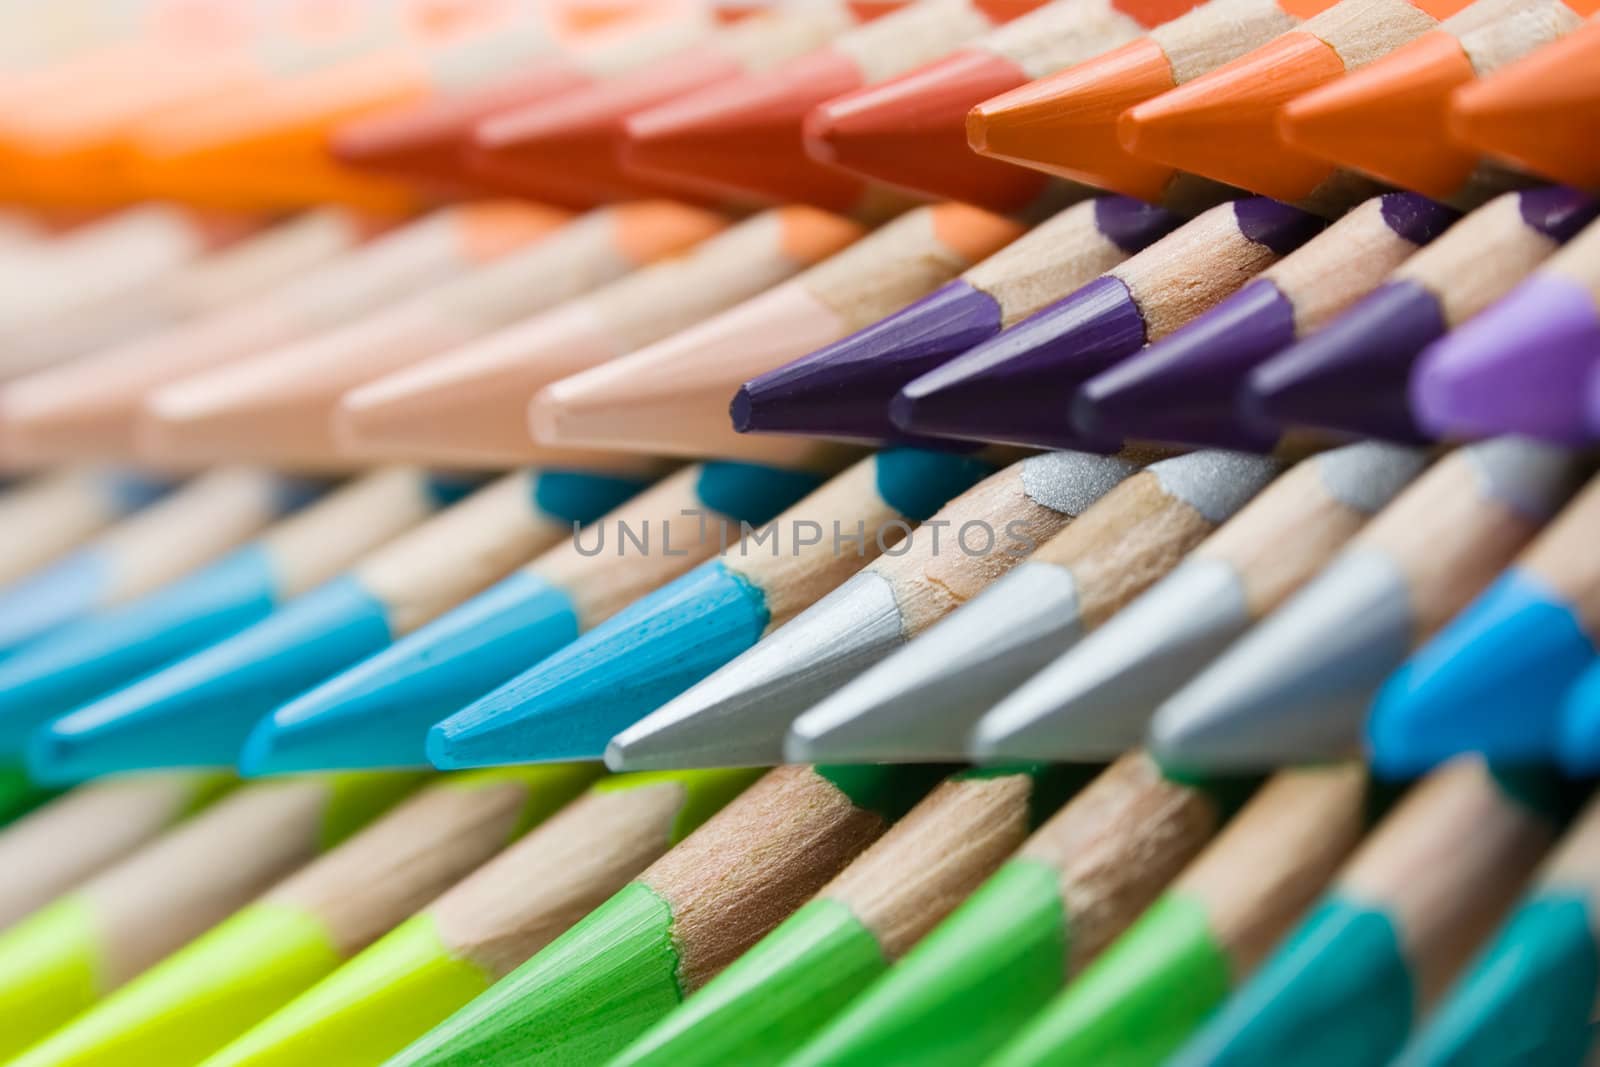 Abstract shot of stacked colored pencils. Shallow depth of field.